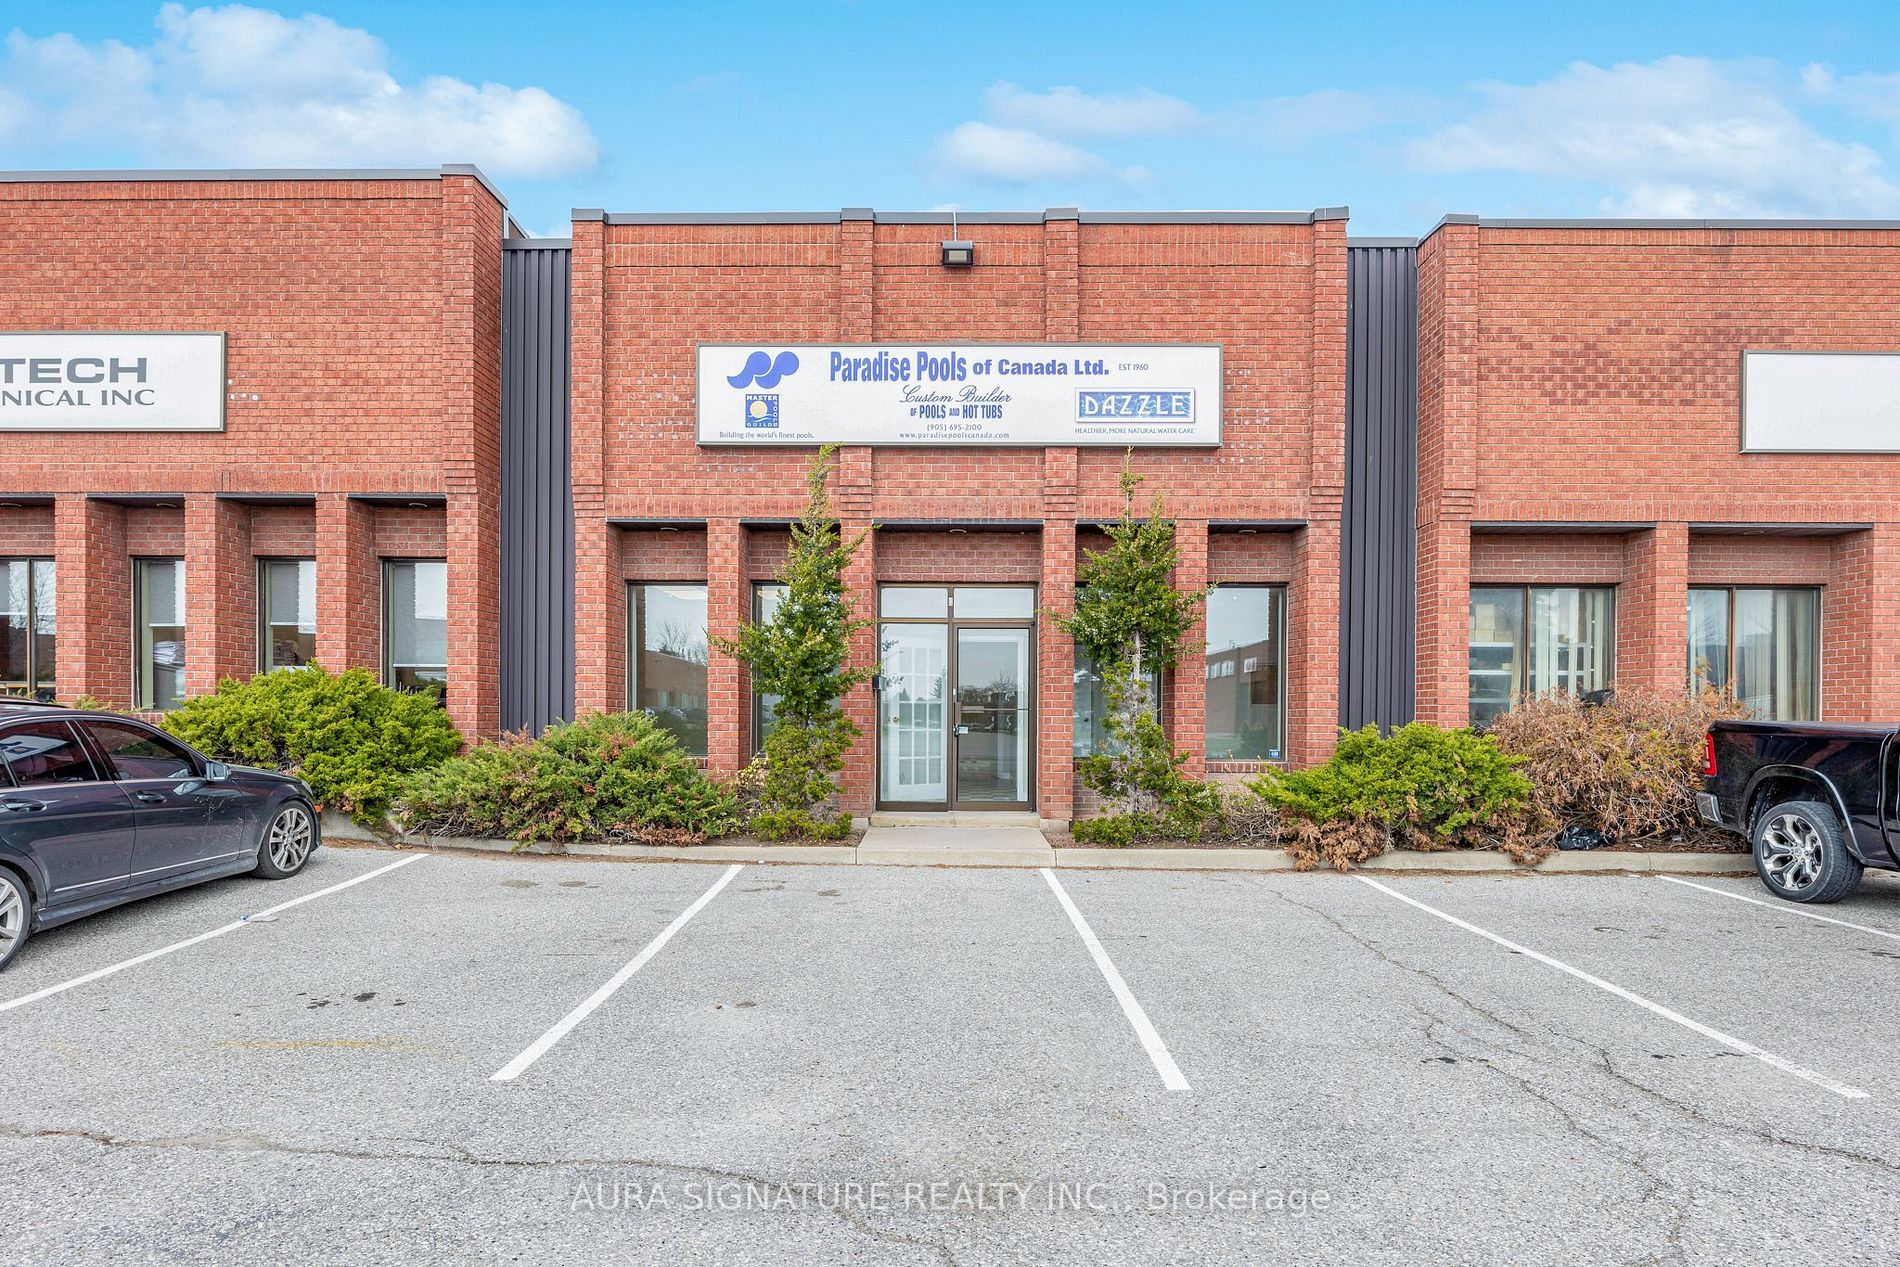 I have sold a property at 6 176 Rivermede RD in Vaughan
